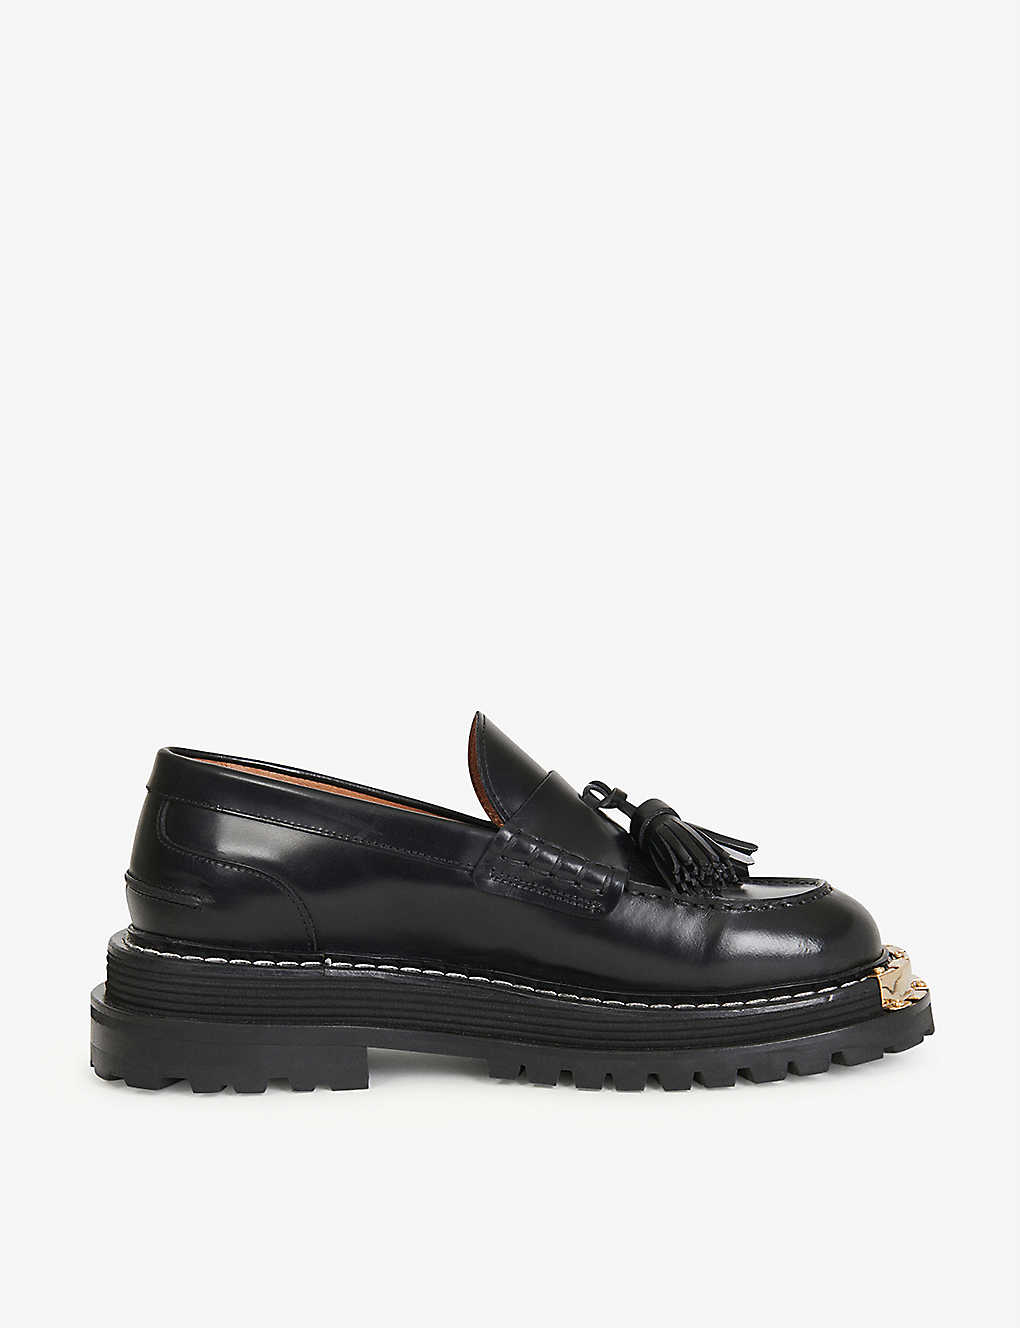 Iron platform leather loafers(9303948)